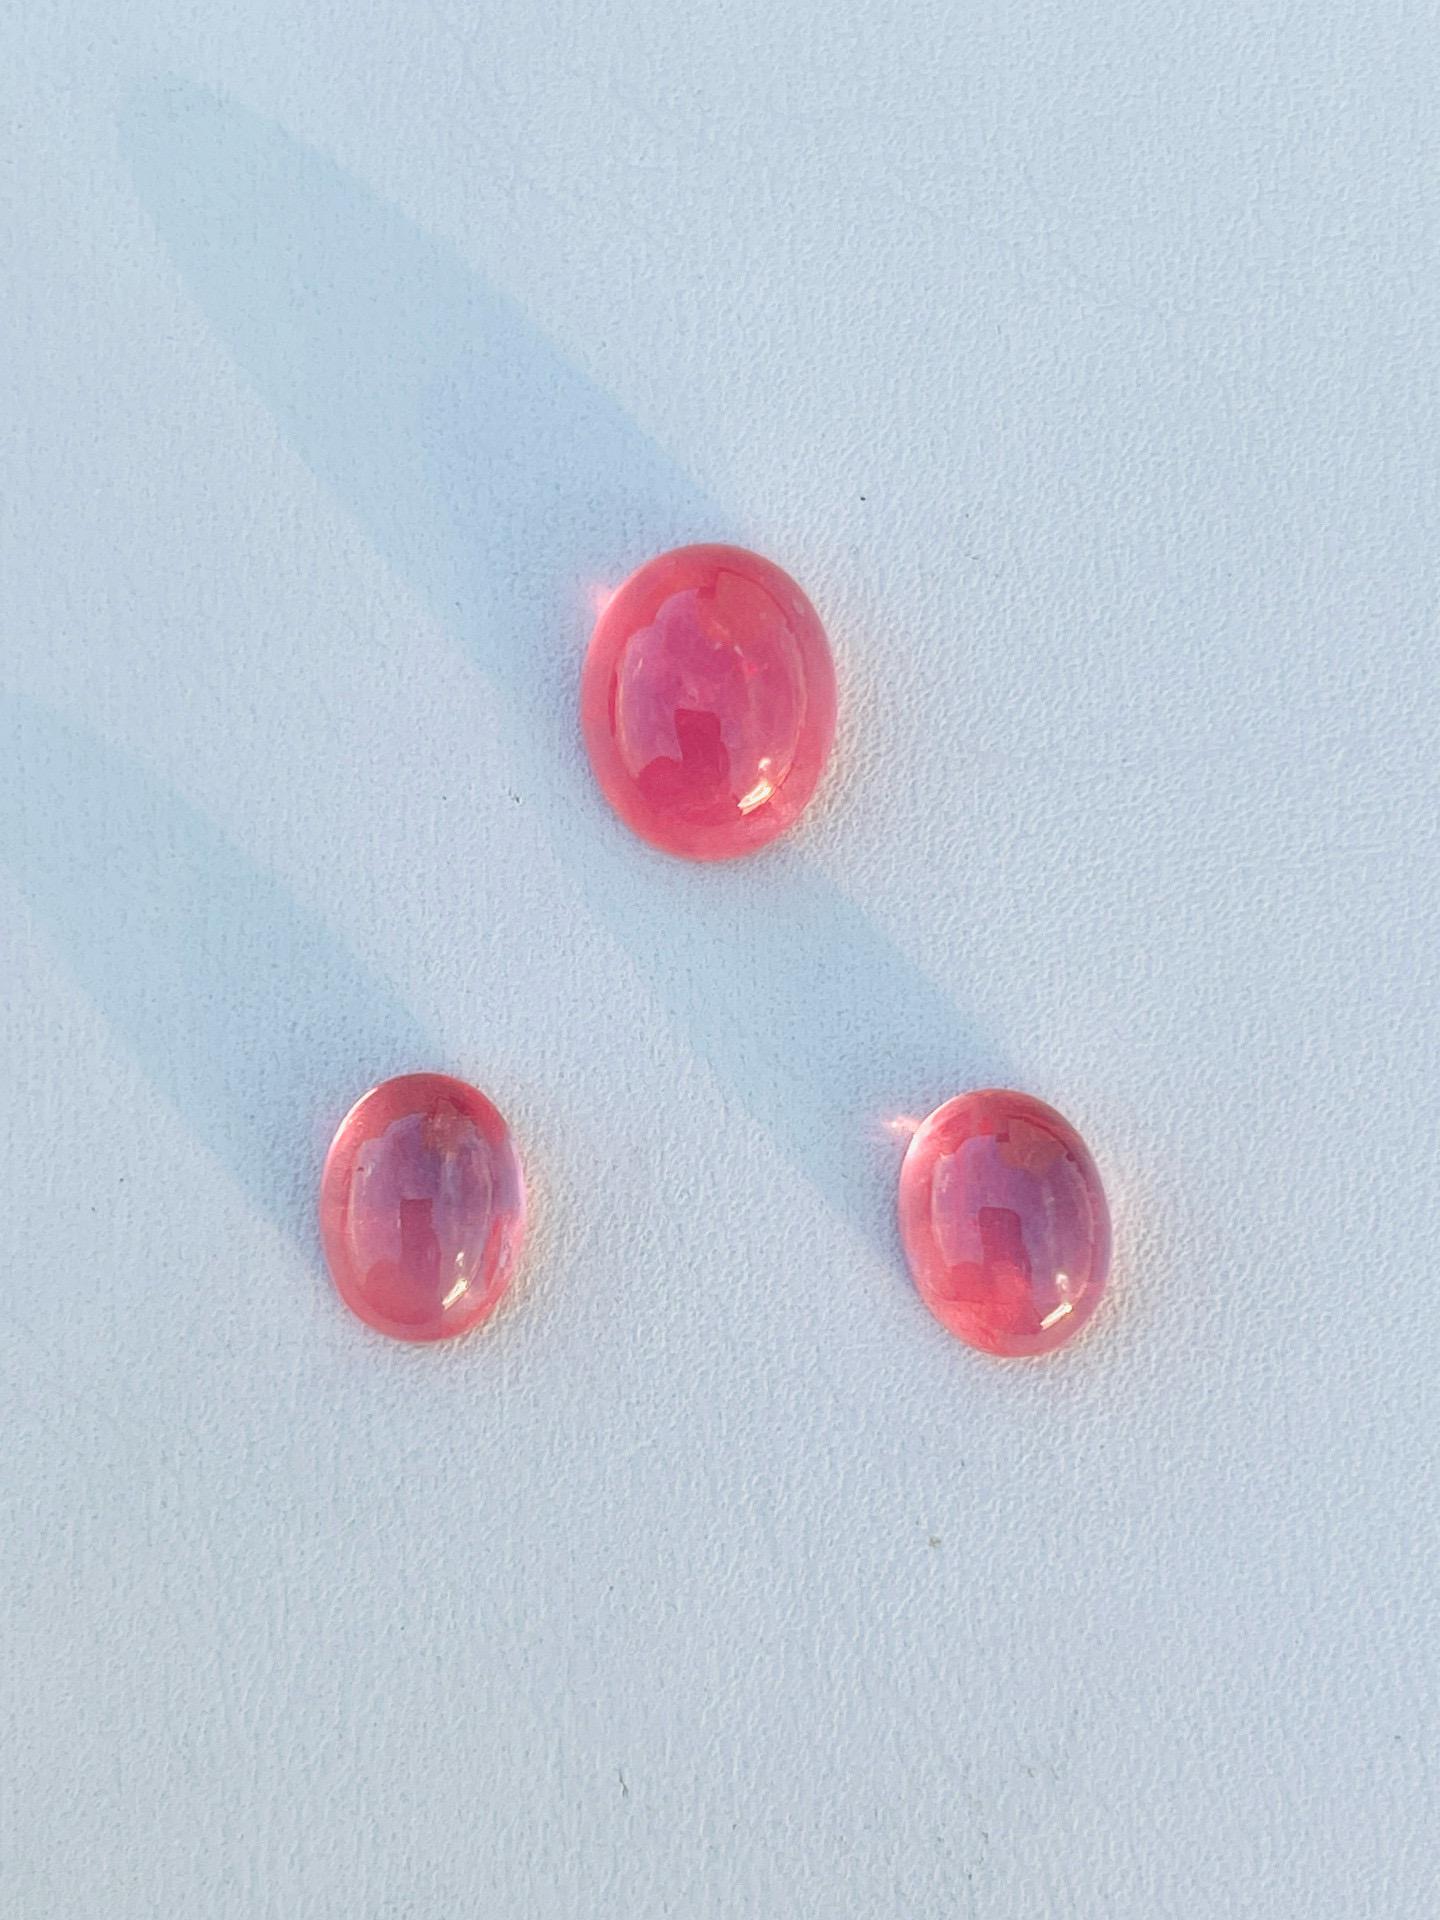 Name: Rhodochrosite
Weight: 10.37ct (3 pcs one set )
size：11*9mm 9*7mm
Origin: American 
Color: rose pink red
Clarity: 99-97% clean 
Others: transparent crystal
Cut: perfect cabochon 


OTF01
Rare Rhodochrosite American cabochon pink transparent